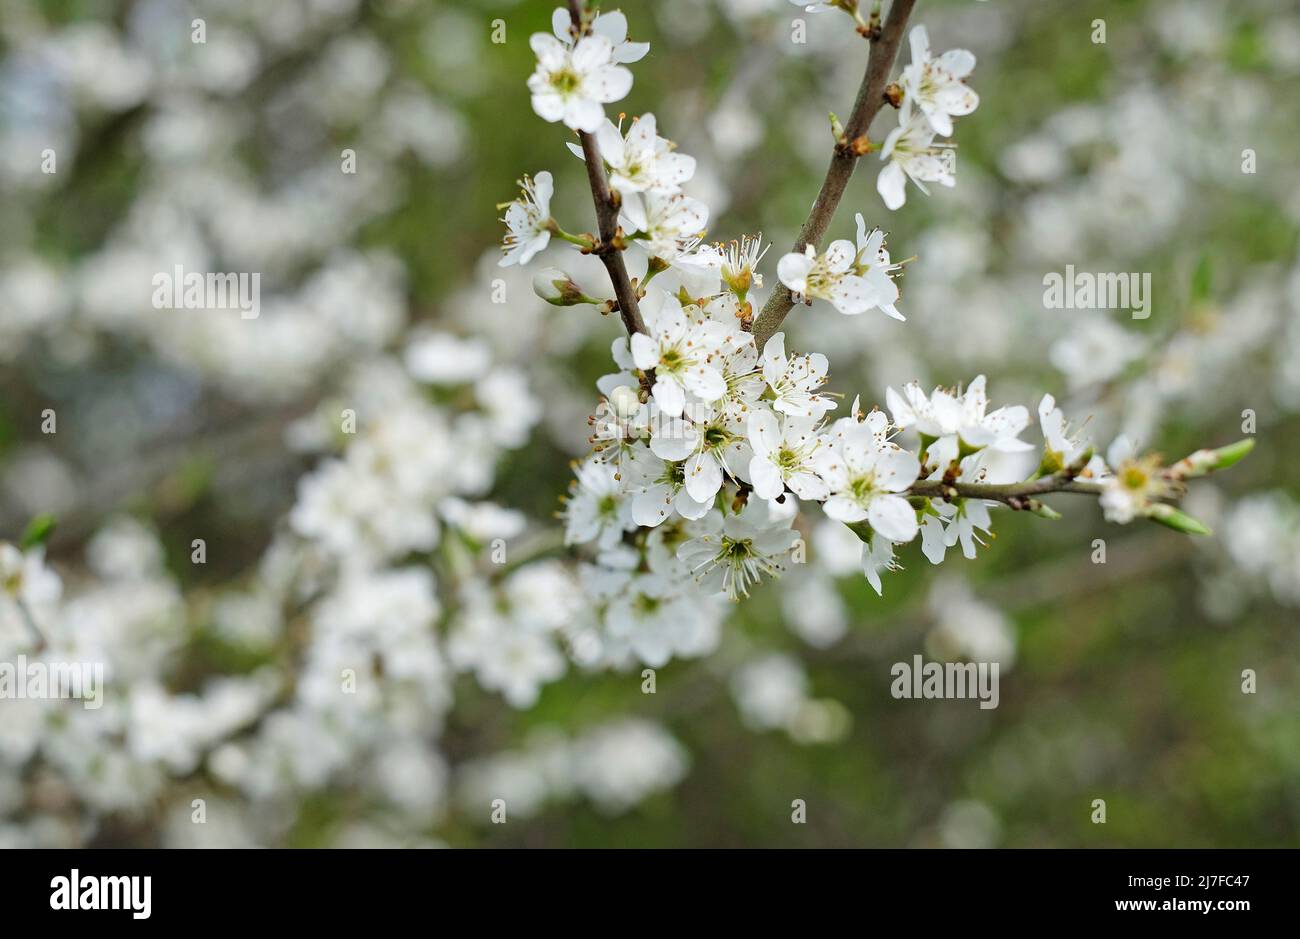 close up of flowering white blackthorn flowers, norfolk, england Stock Photo